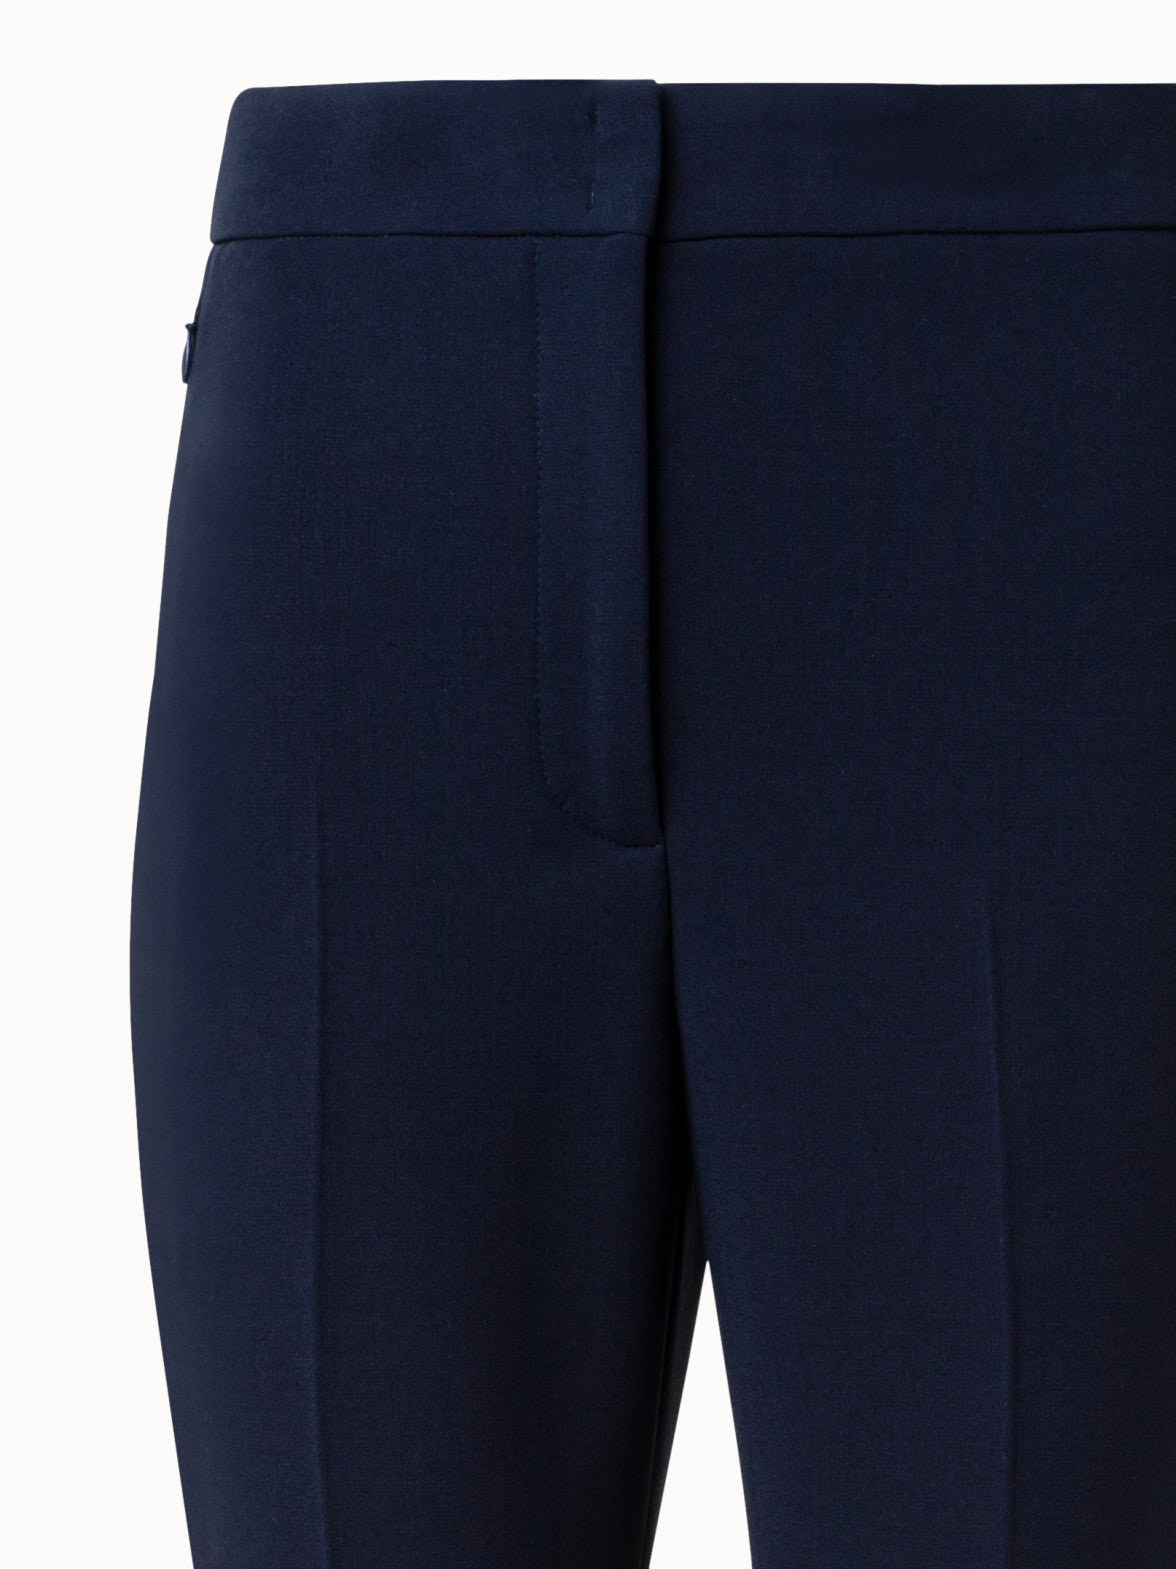 Buy New Womens Navy Stretch Bootleg Trousers